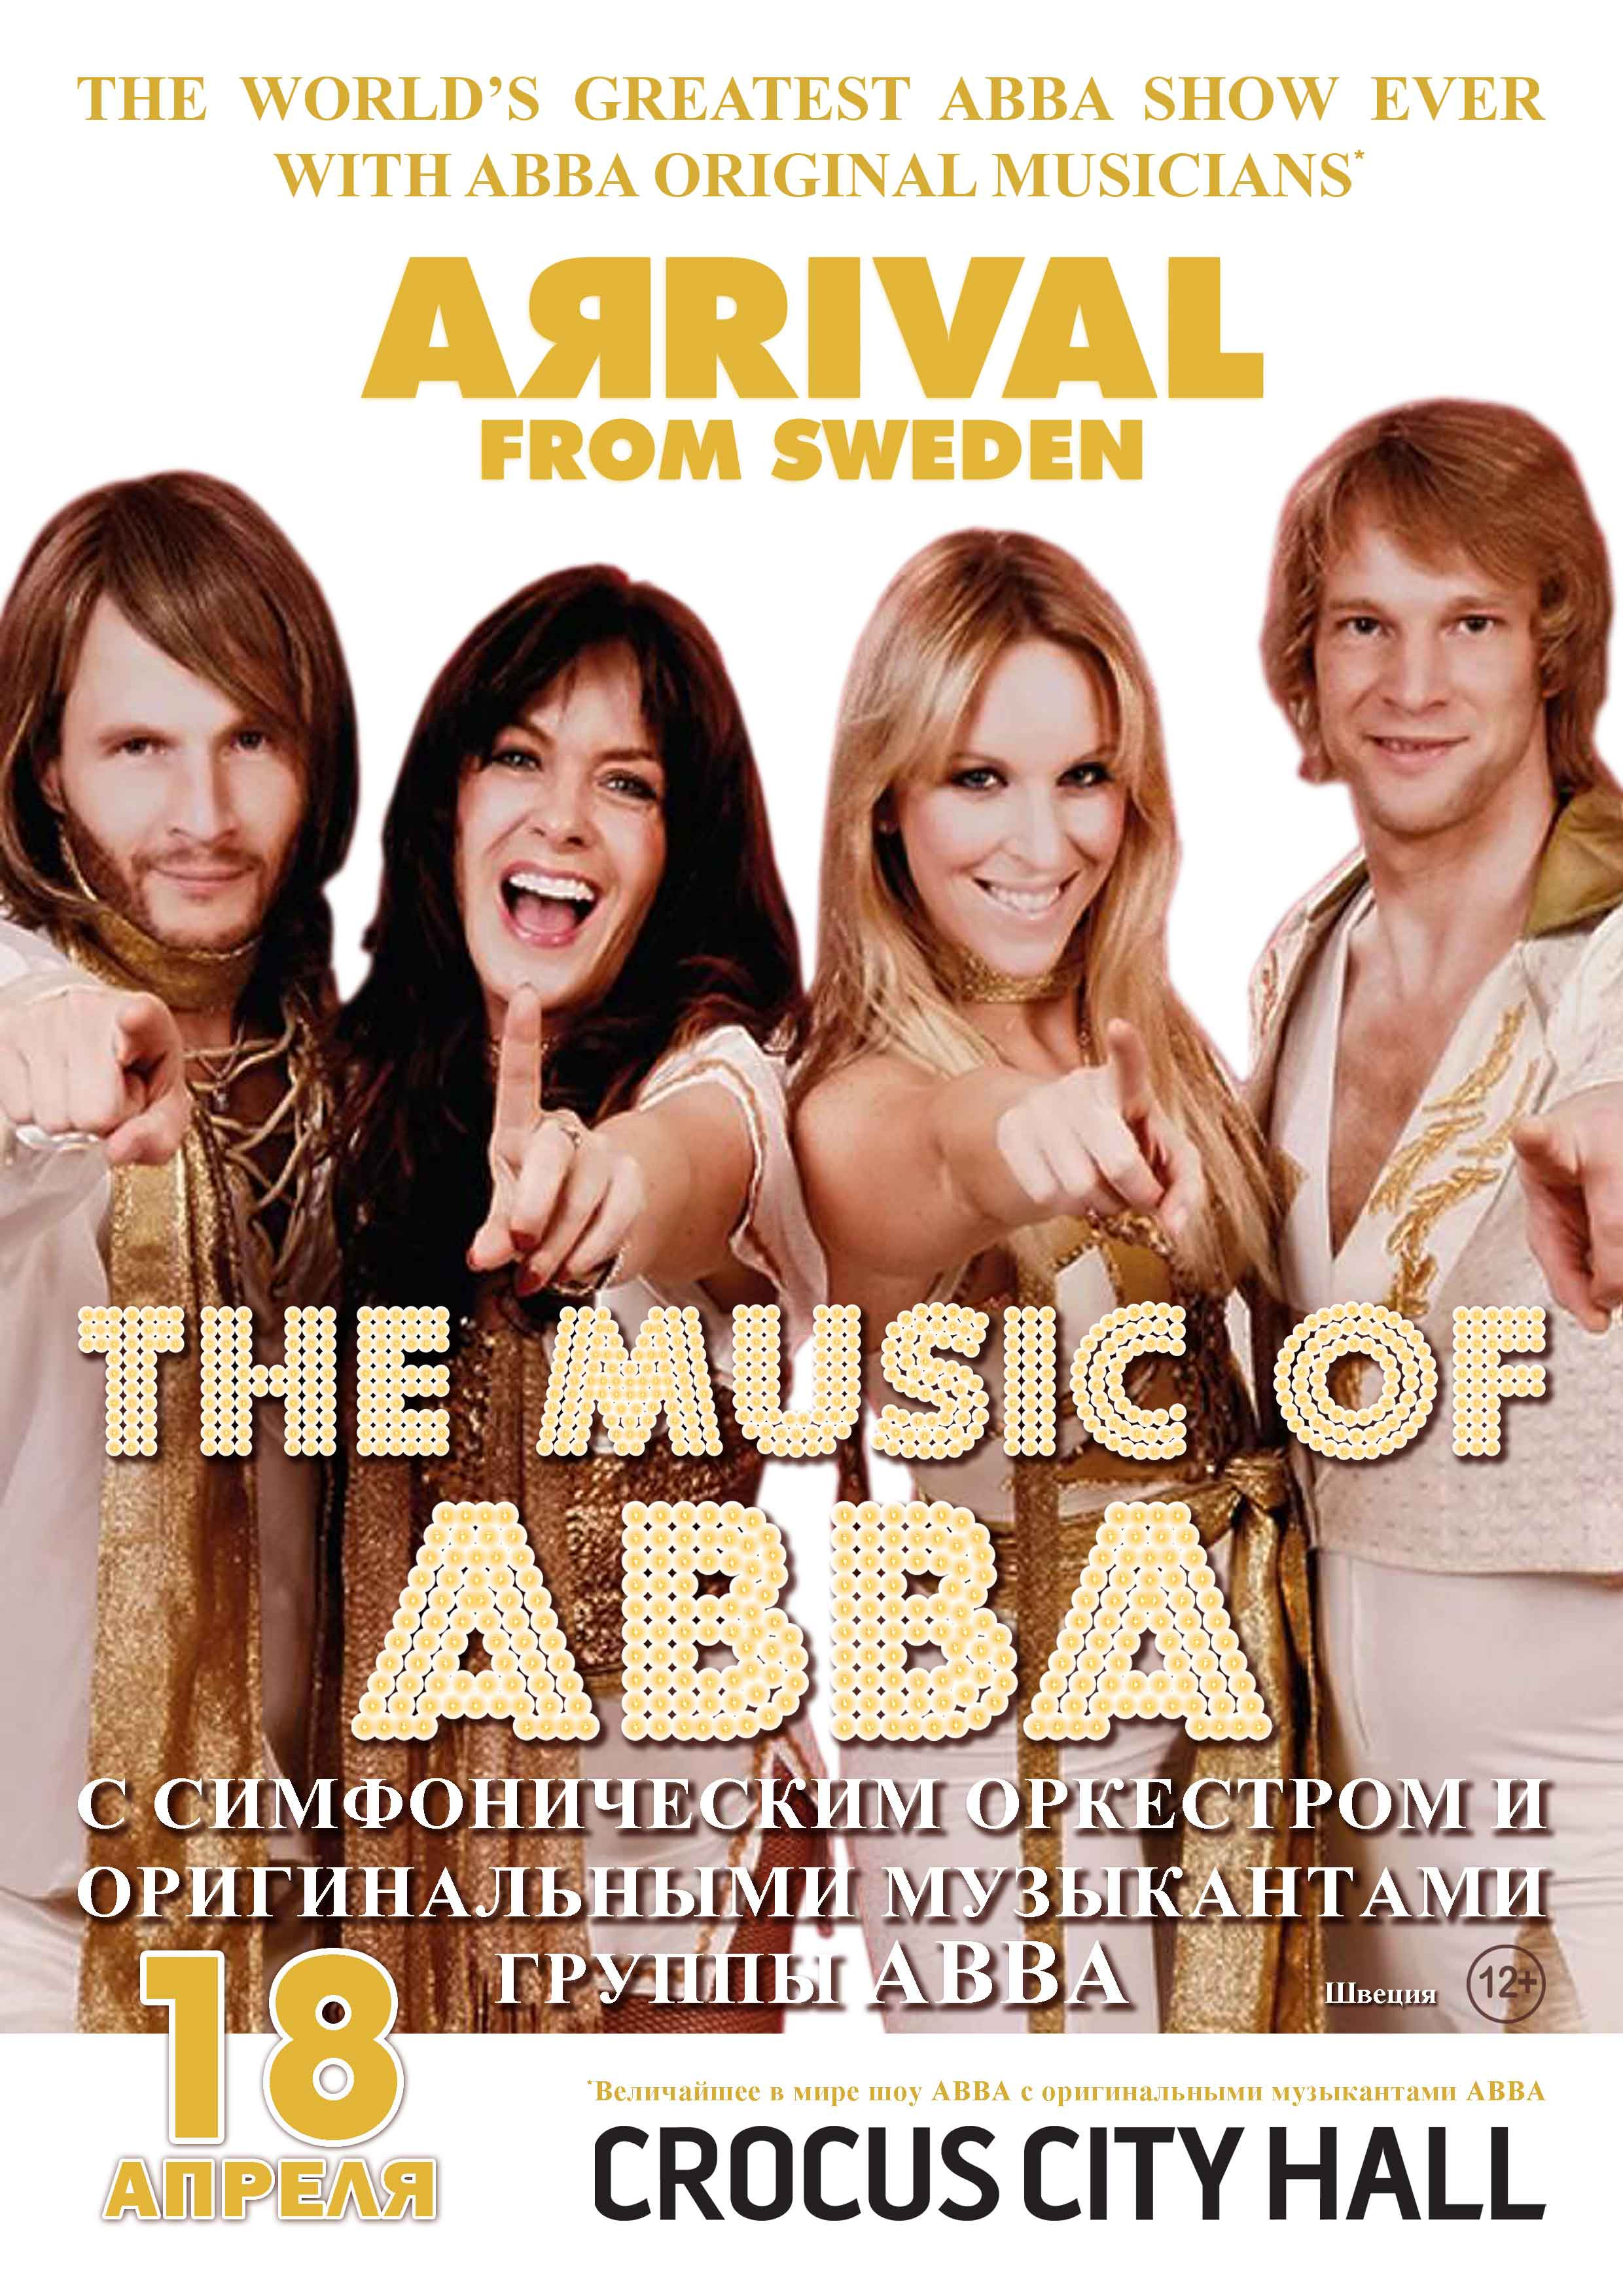 The World's Greatest ABBA Show